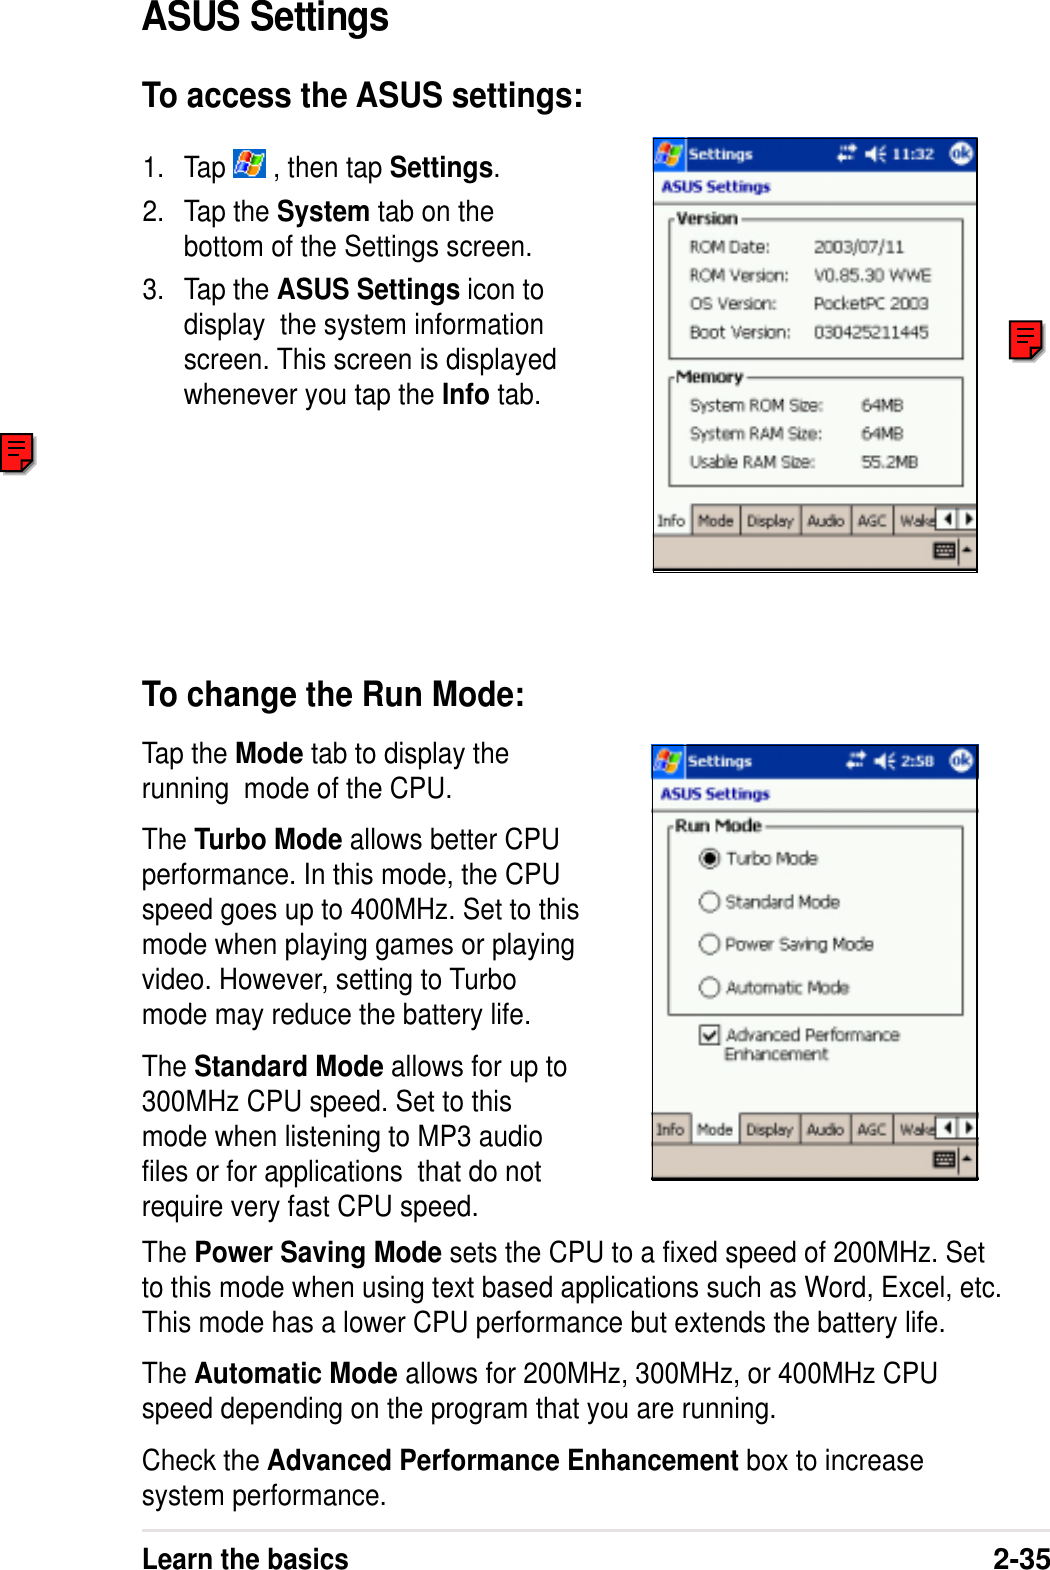 Learn the basics2-35Tap the Mode tab to display therunning  mode of the CPU.The Turbo Mode allows better CPUperformance. In this mode, the CPUspeed goes up to 400MHz. Set to thismode when playing games or playingvideo. However, setting to Turbomode may reduce the battery life.The Standard Mode allows for up to300MHz CPU speed. Set to thismode when listening to MP3 audiofiles or for applications  that do notrequire very fast CPU speed.1. Tap   , then tap Settings.2. Tap the System tab on thebottom of the Settings screen.3. Tap the ASUS Settings icon todisplay  the system informationscreen. This screen is displayedwhenever you tap the Info tab.ASUS SettingsTo access the ASUS settings:To change the Run Mode:The Power Saving Mode sets the CPU to a fixed speed of 200MHz. Setto this mode when using text based applications such as Word, Excel, etc.This mode has a lower CPU performance but extends the battery life.The Automatic Mode allows for 200MHz, 300MHz, or 400MHz CPUspeed depending on the program that you are running.Check the Advanced Performance Enhancement box to increasesystem performance.